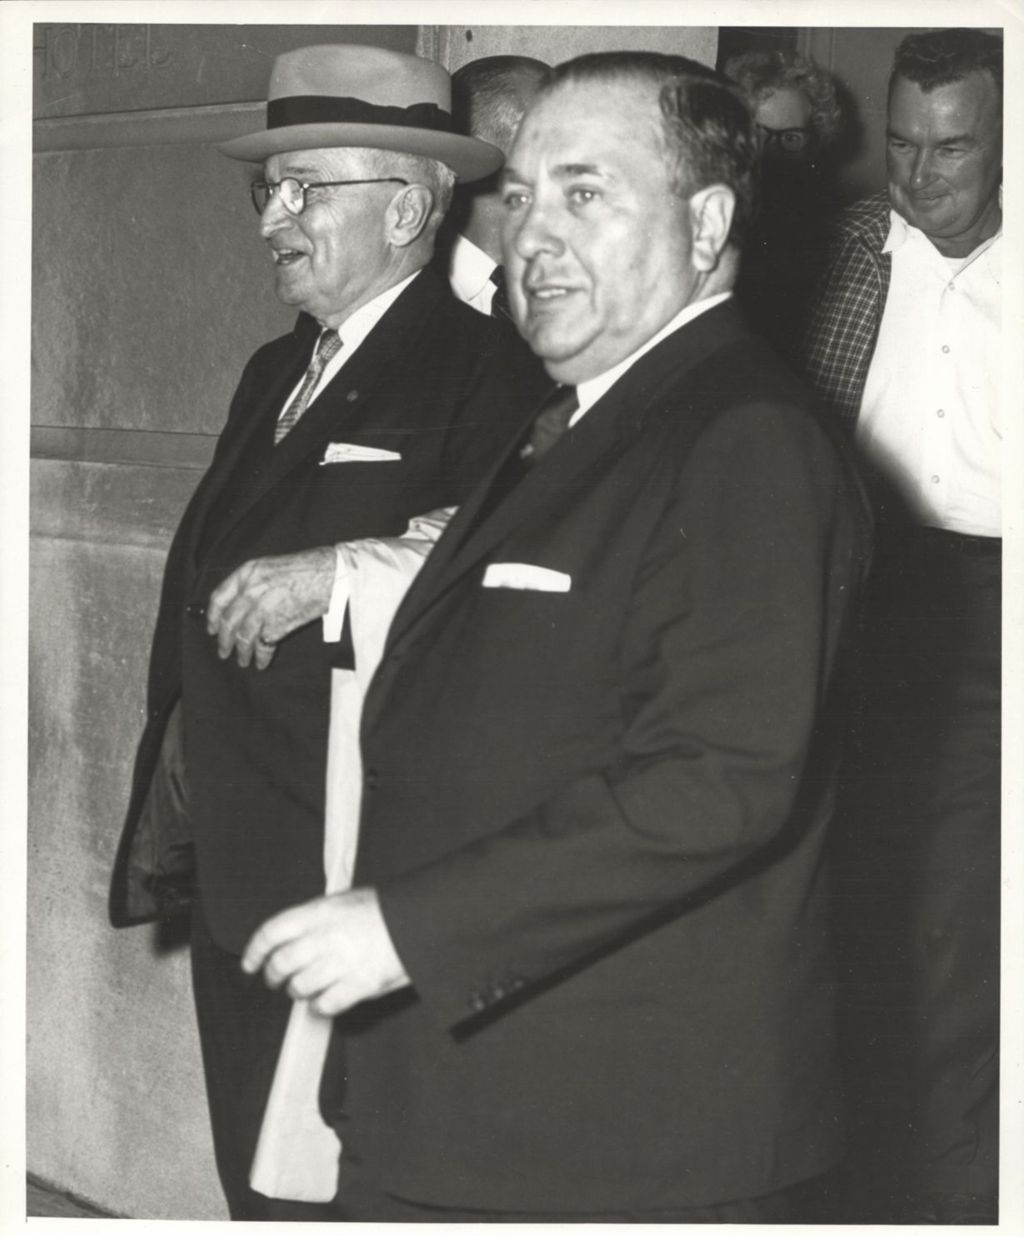 Harry S. Truman standing with Richard J. Daley